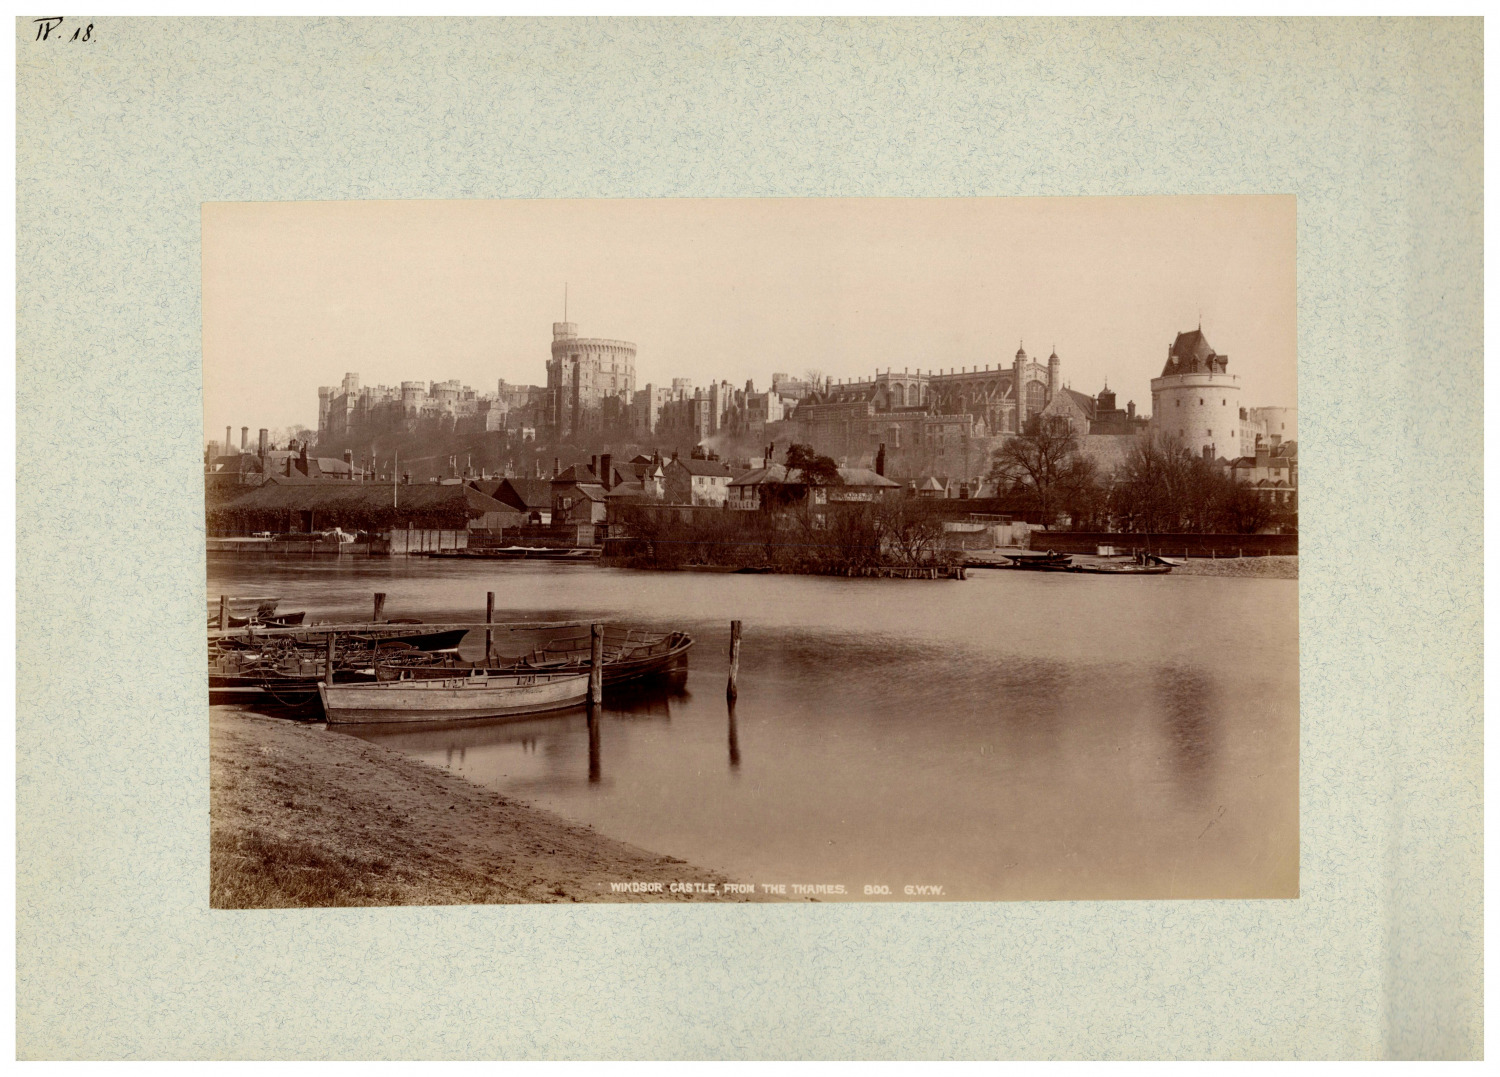 England, Windsor Castle, from the Thames, G.W.W. Vintage print, albumi print run